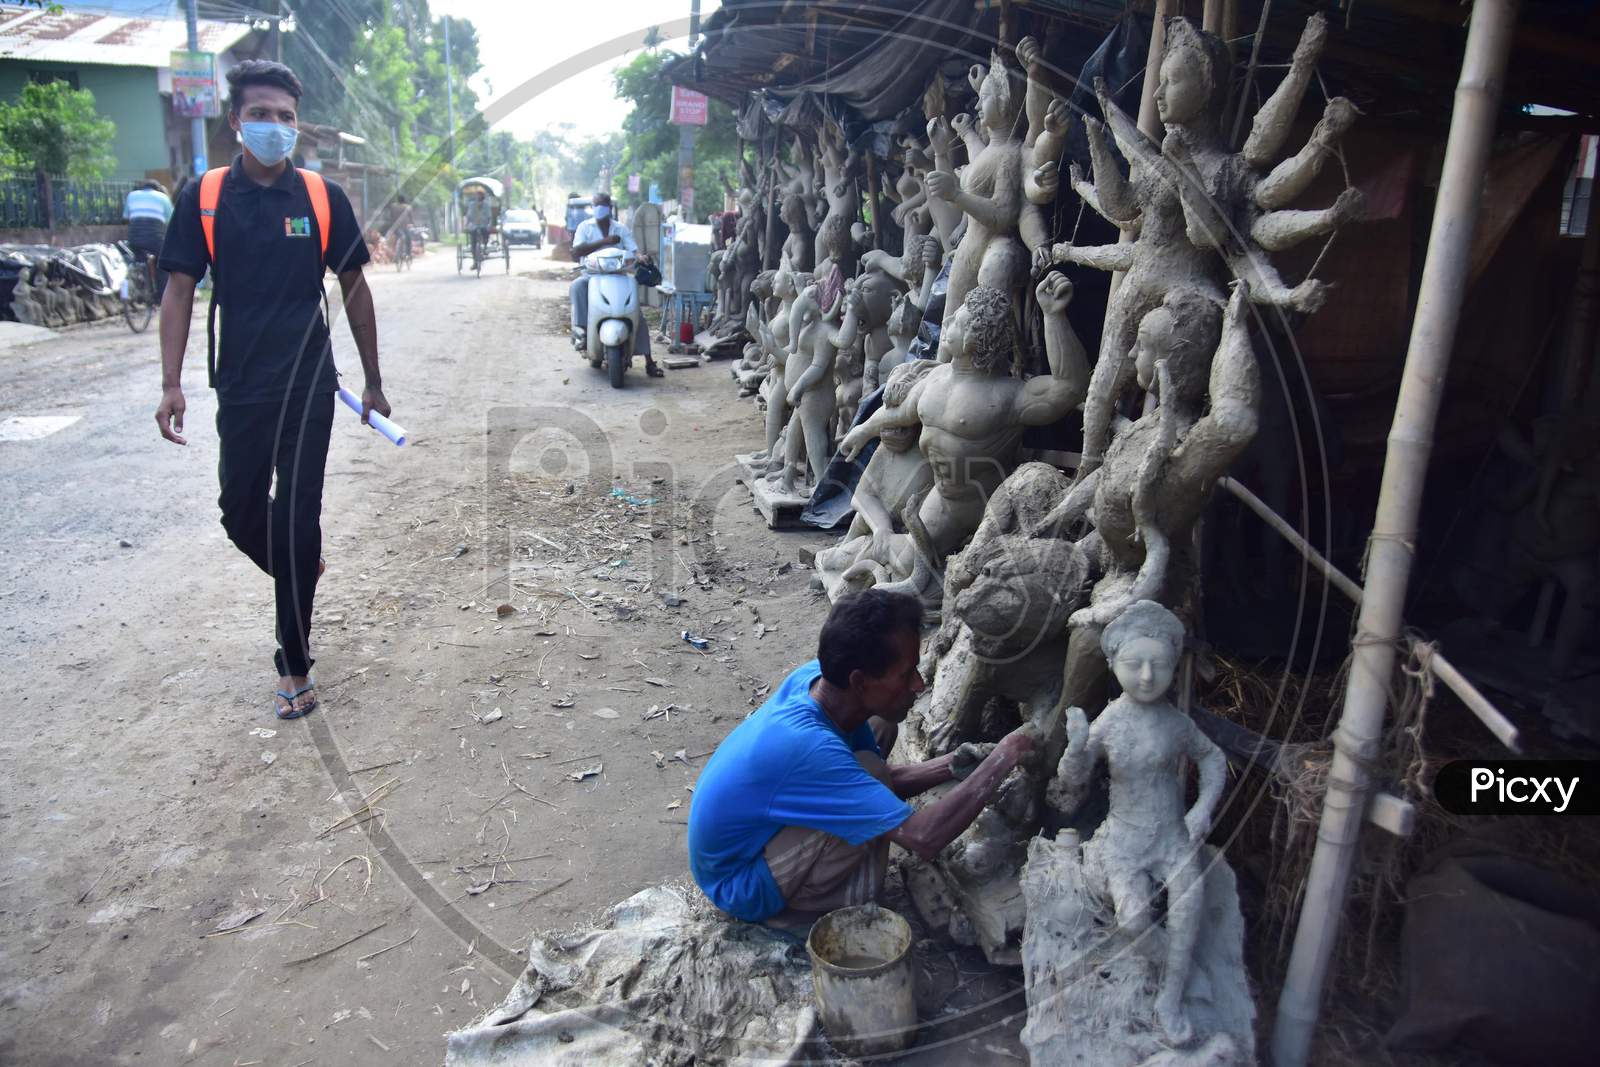 Durga idol is being prepared by an artist ahead of the biggest Hindu festival Durga puja in Nagaon District of Assam on Oct 9,2020